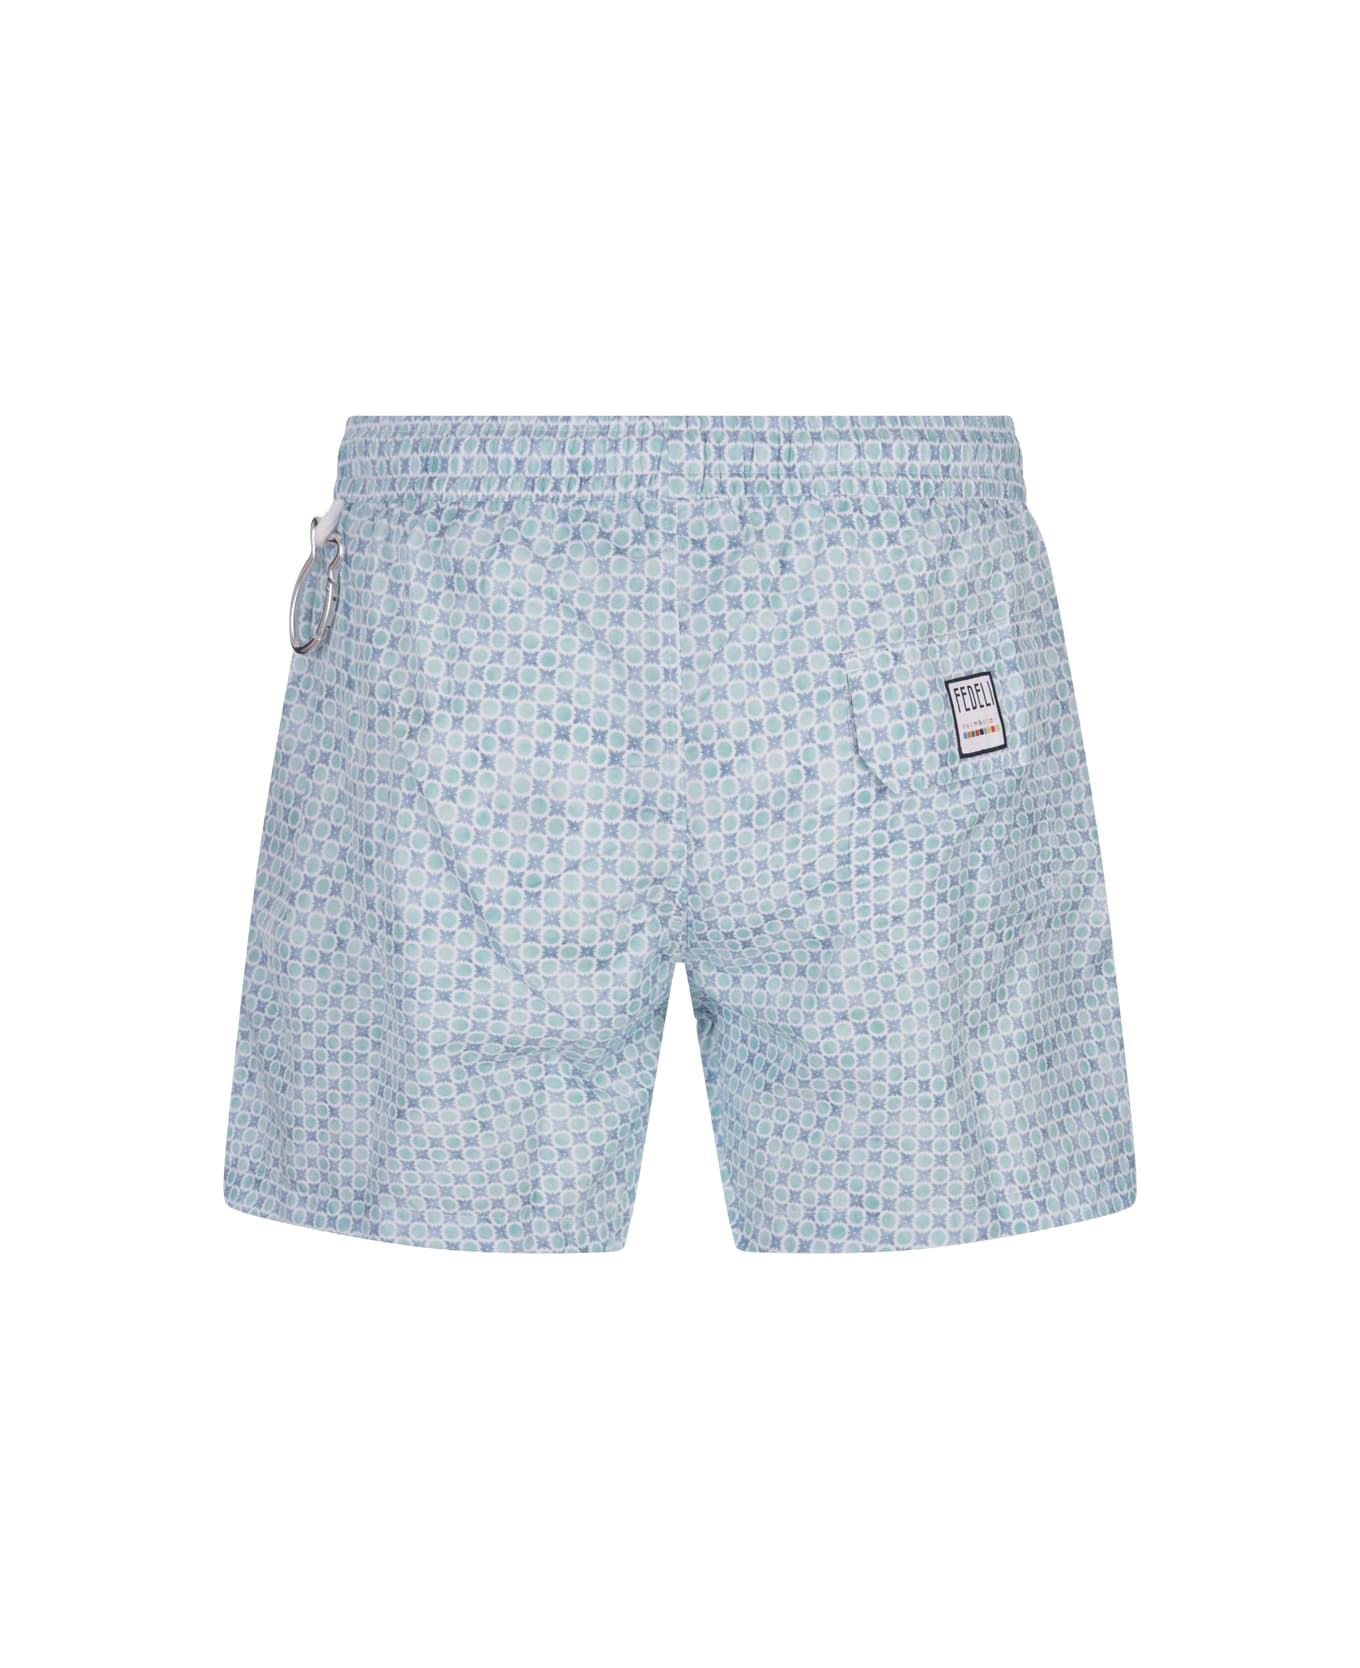 Fedeli Swim Shorts With Micro Pattern Of Polka Dots And Flowers - Blue